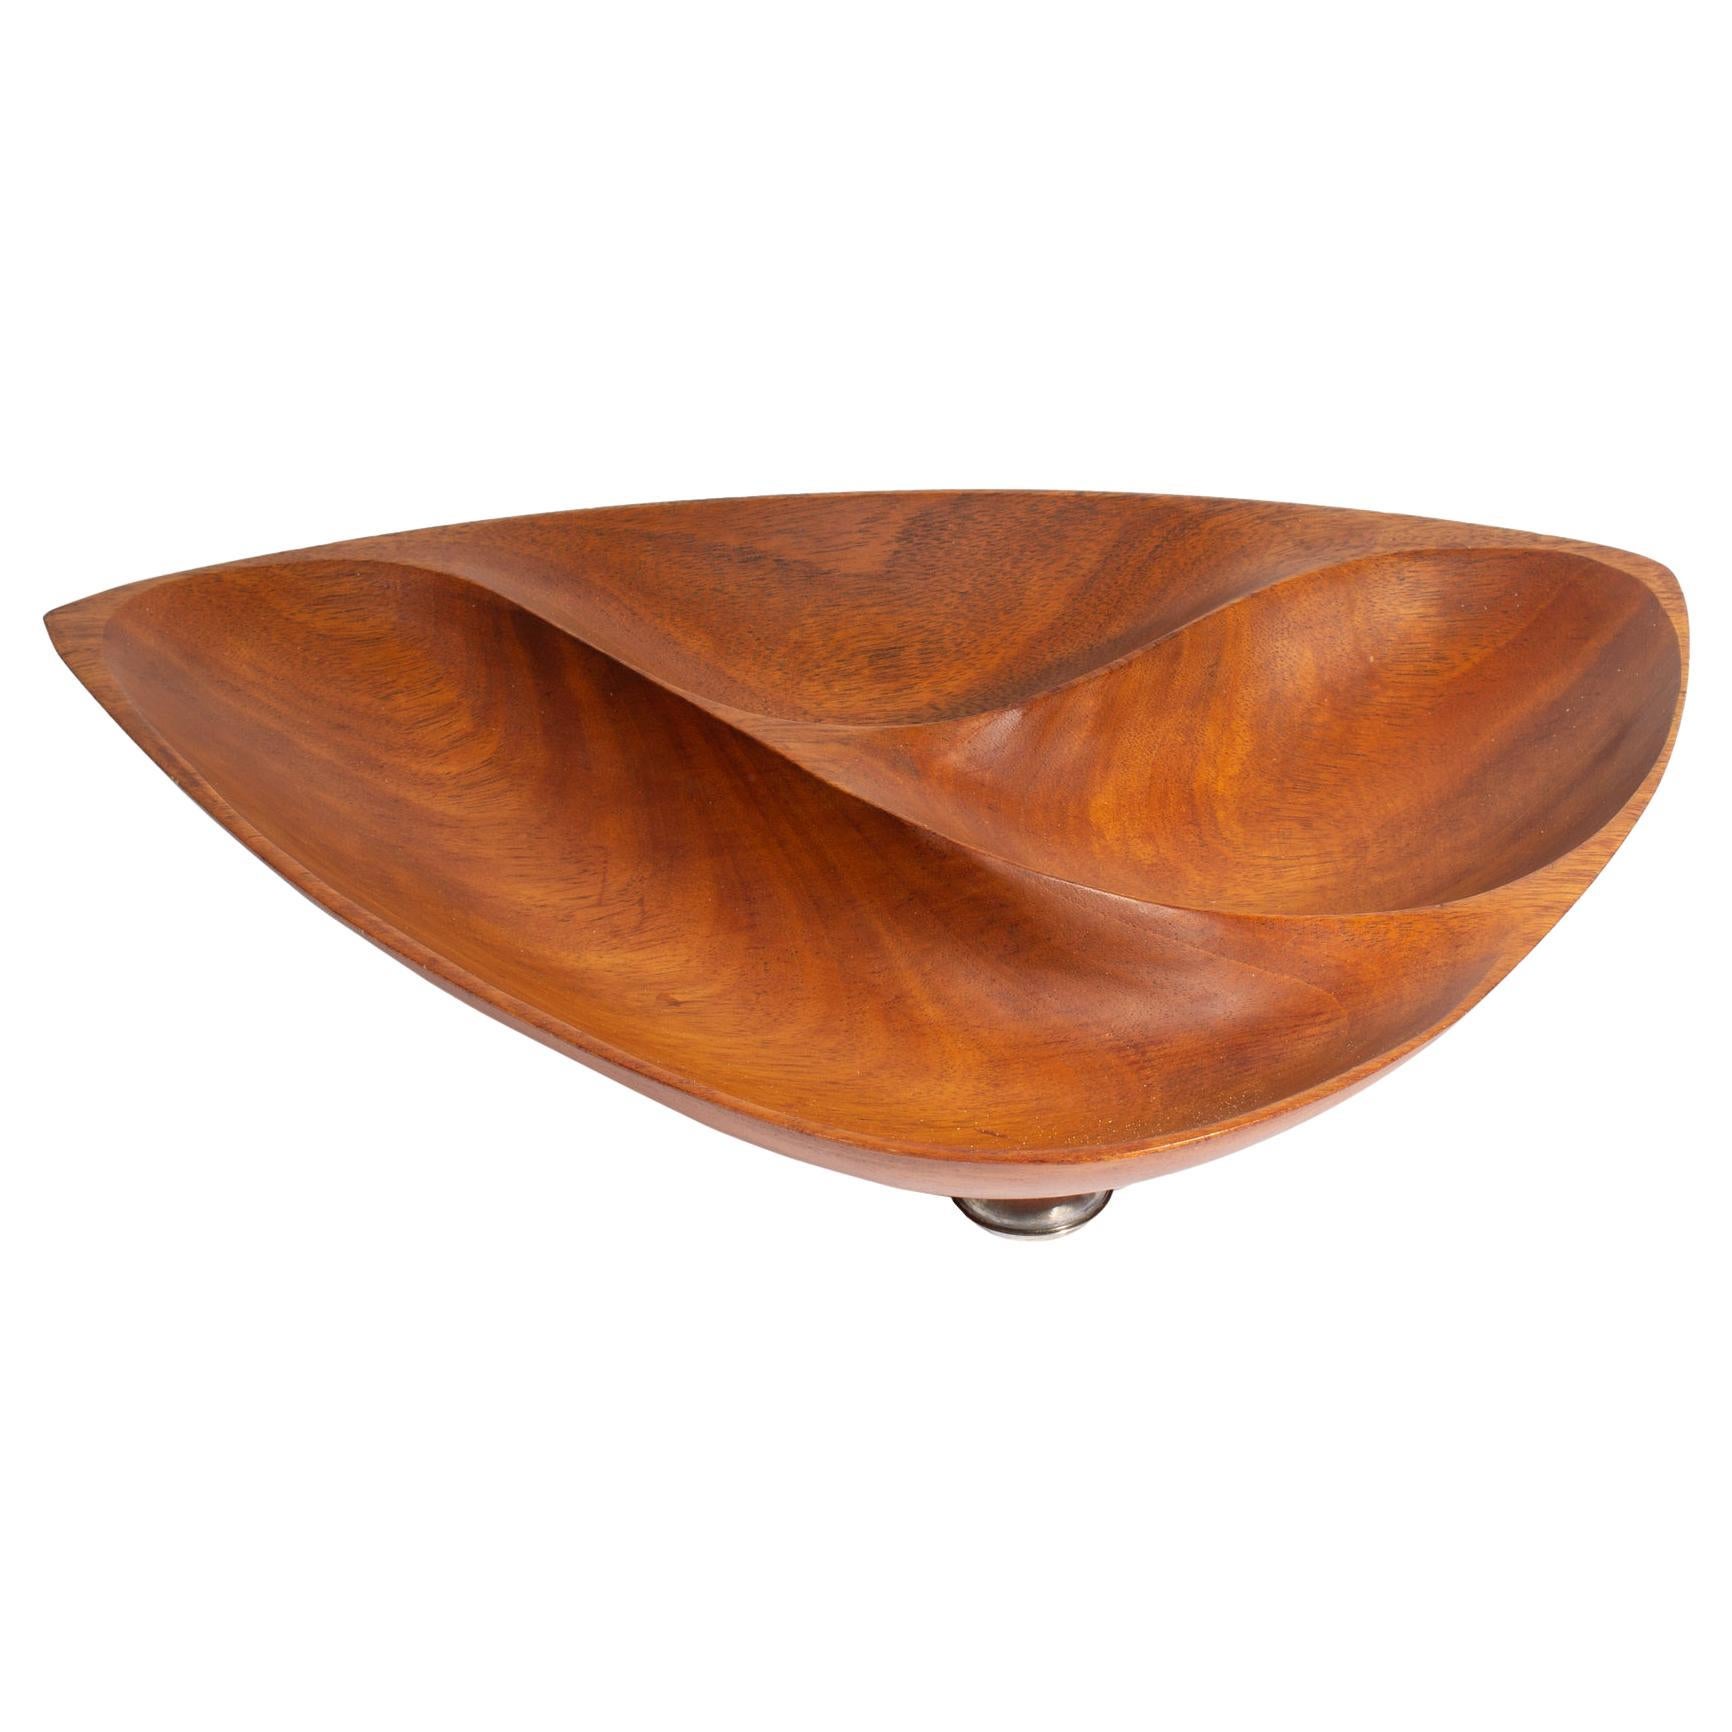 A divided console bowl carved by American woodworker Emil Milan (1922-1985). Carved from African mahogany, also known as Khaya wood, the bowl is divided into three parts and stands on three weighted sterling silver feet below. The underside of the